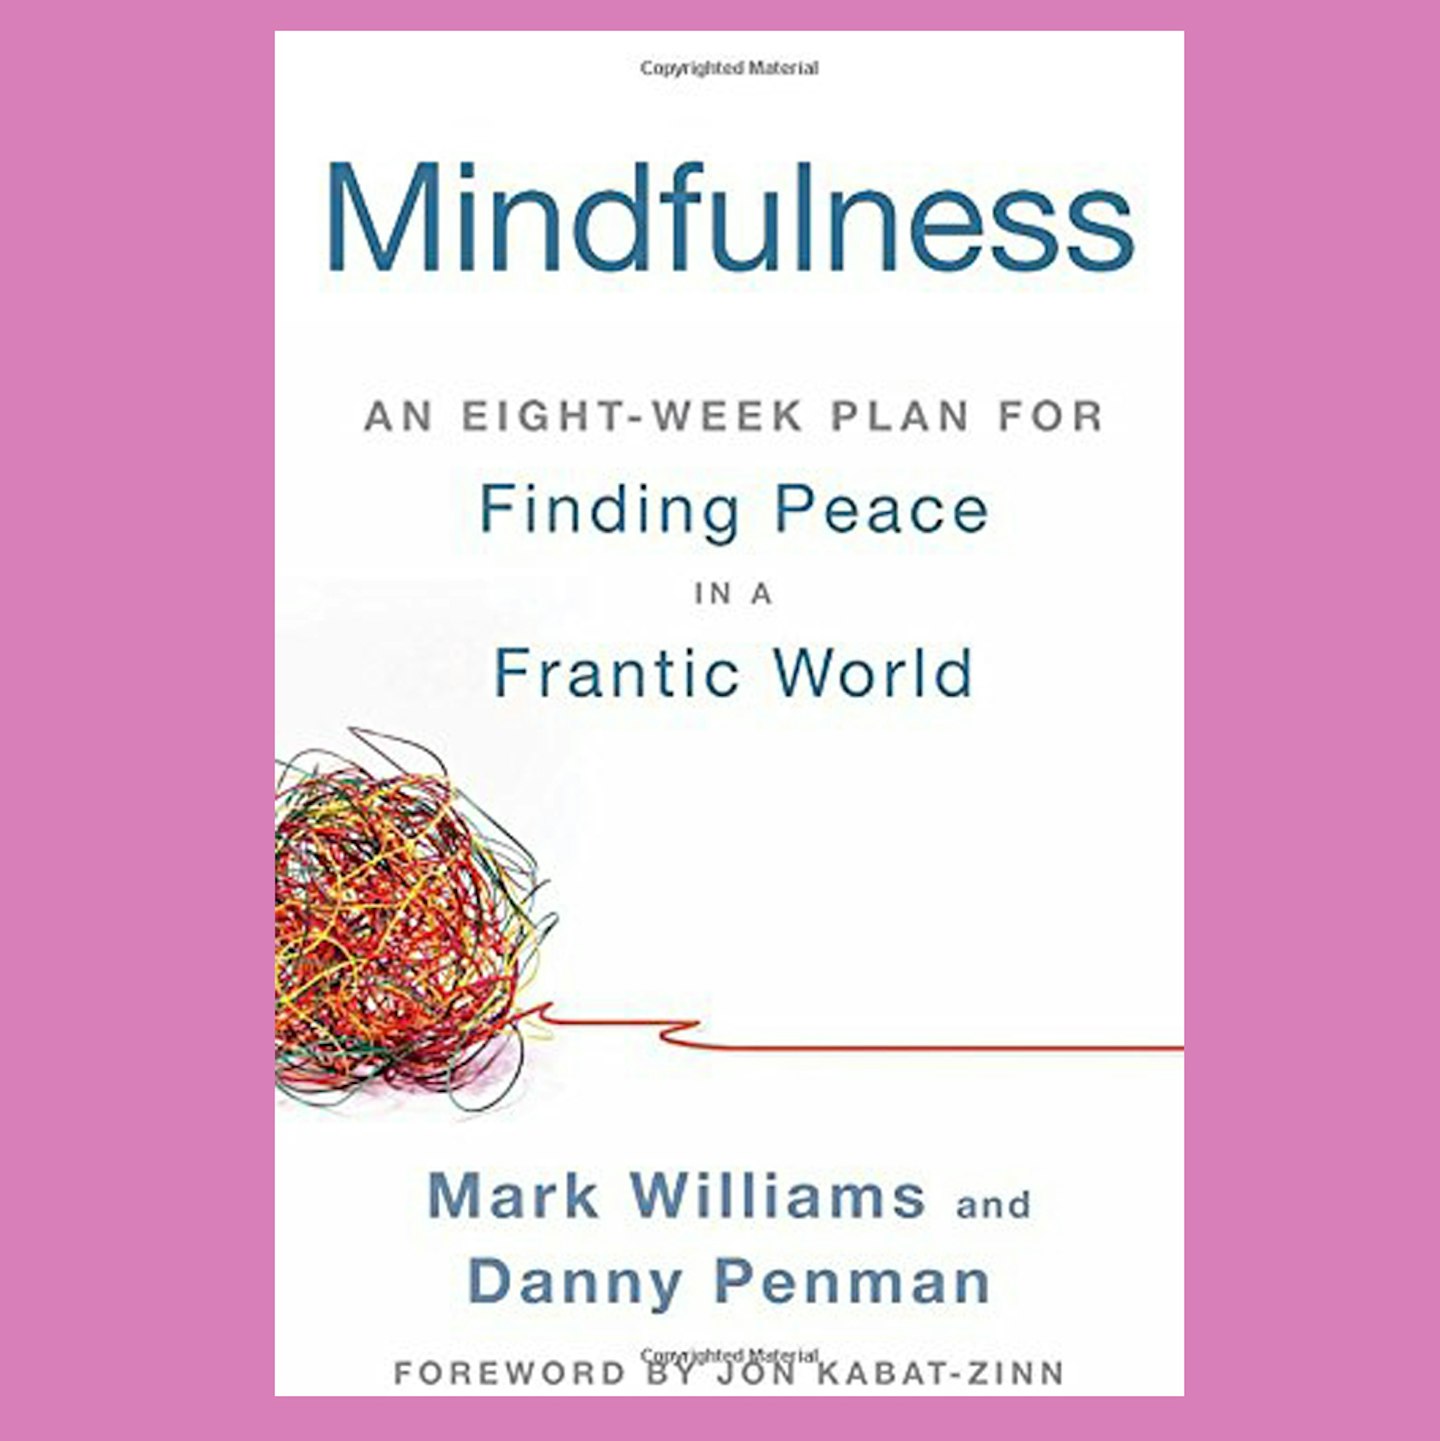 Mindfulness: An Eight-Week Plan for Finding Peace in a Frantic World by Mark Williams and Danny Penman